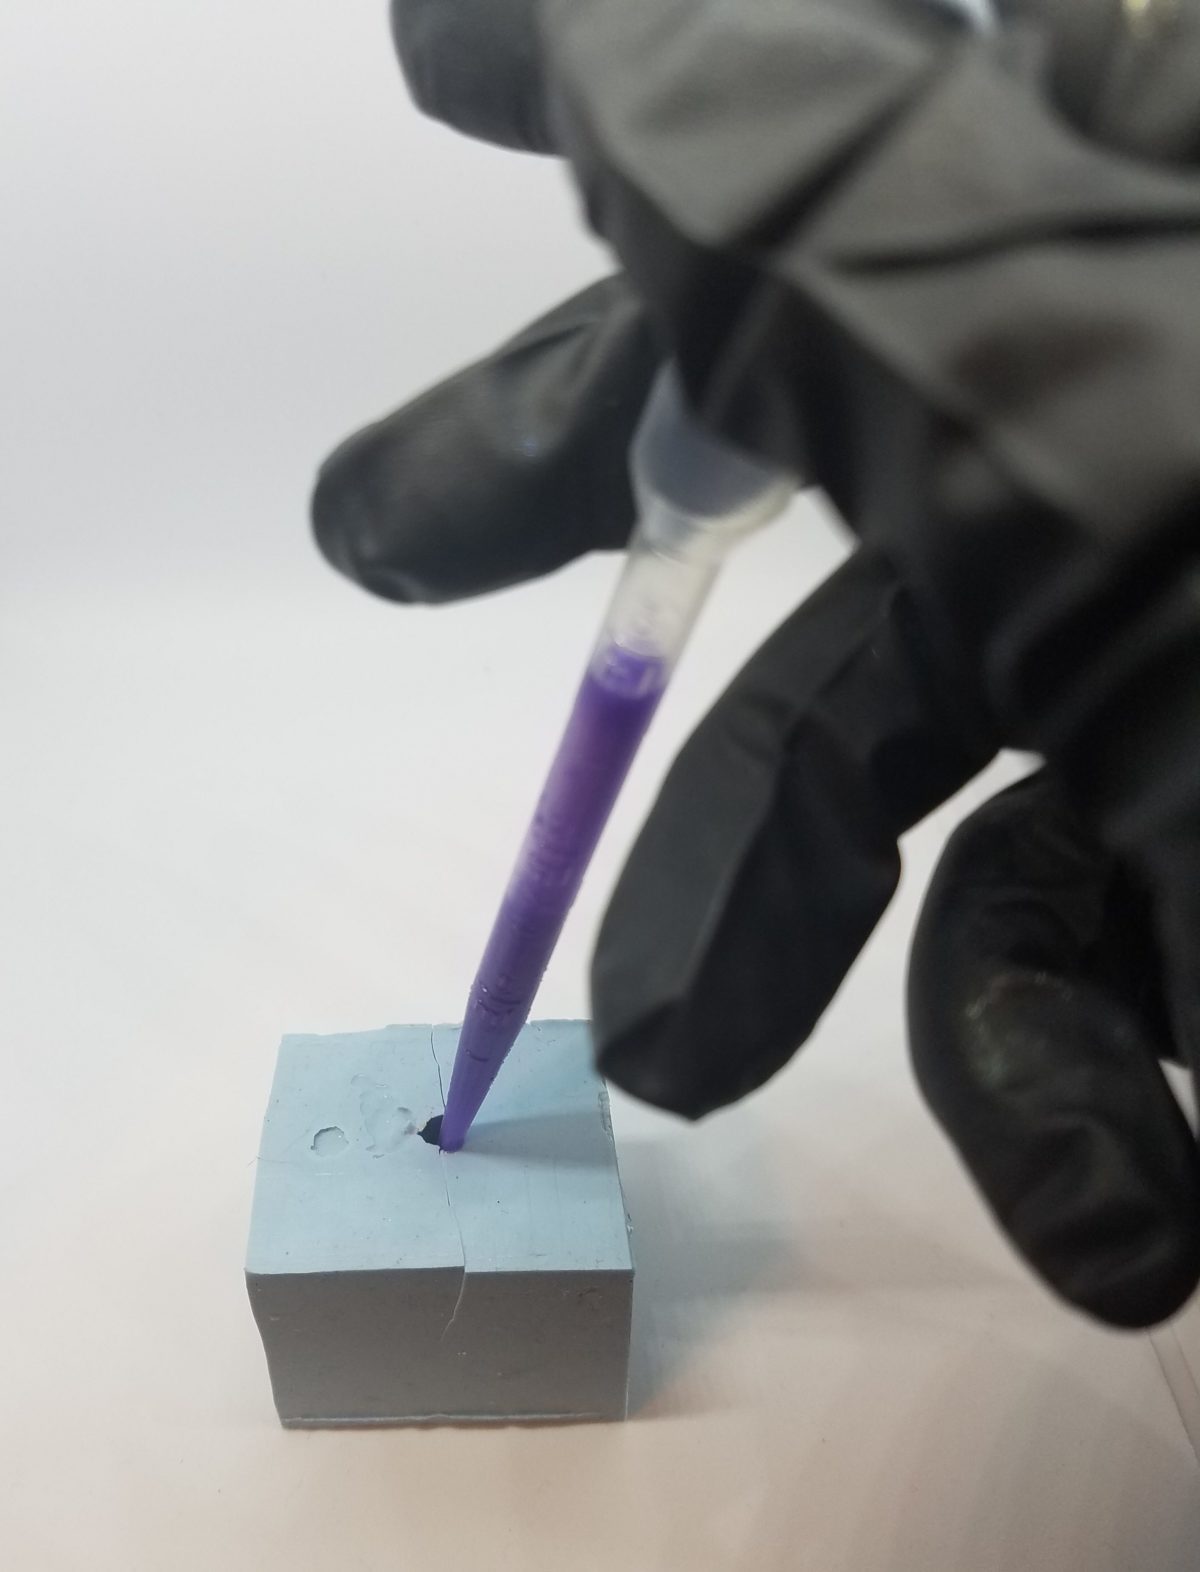 Using a pipette to insert resin into mold